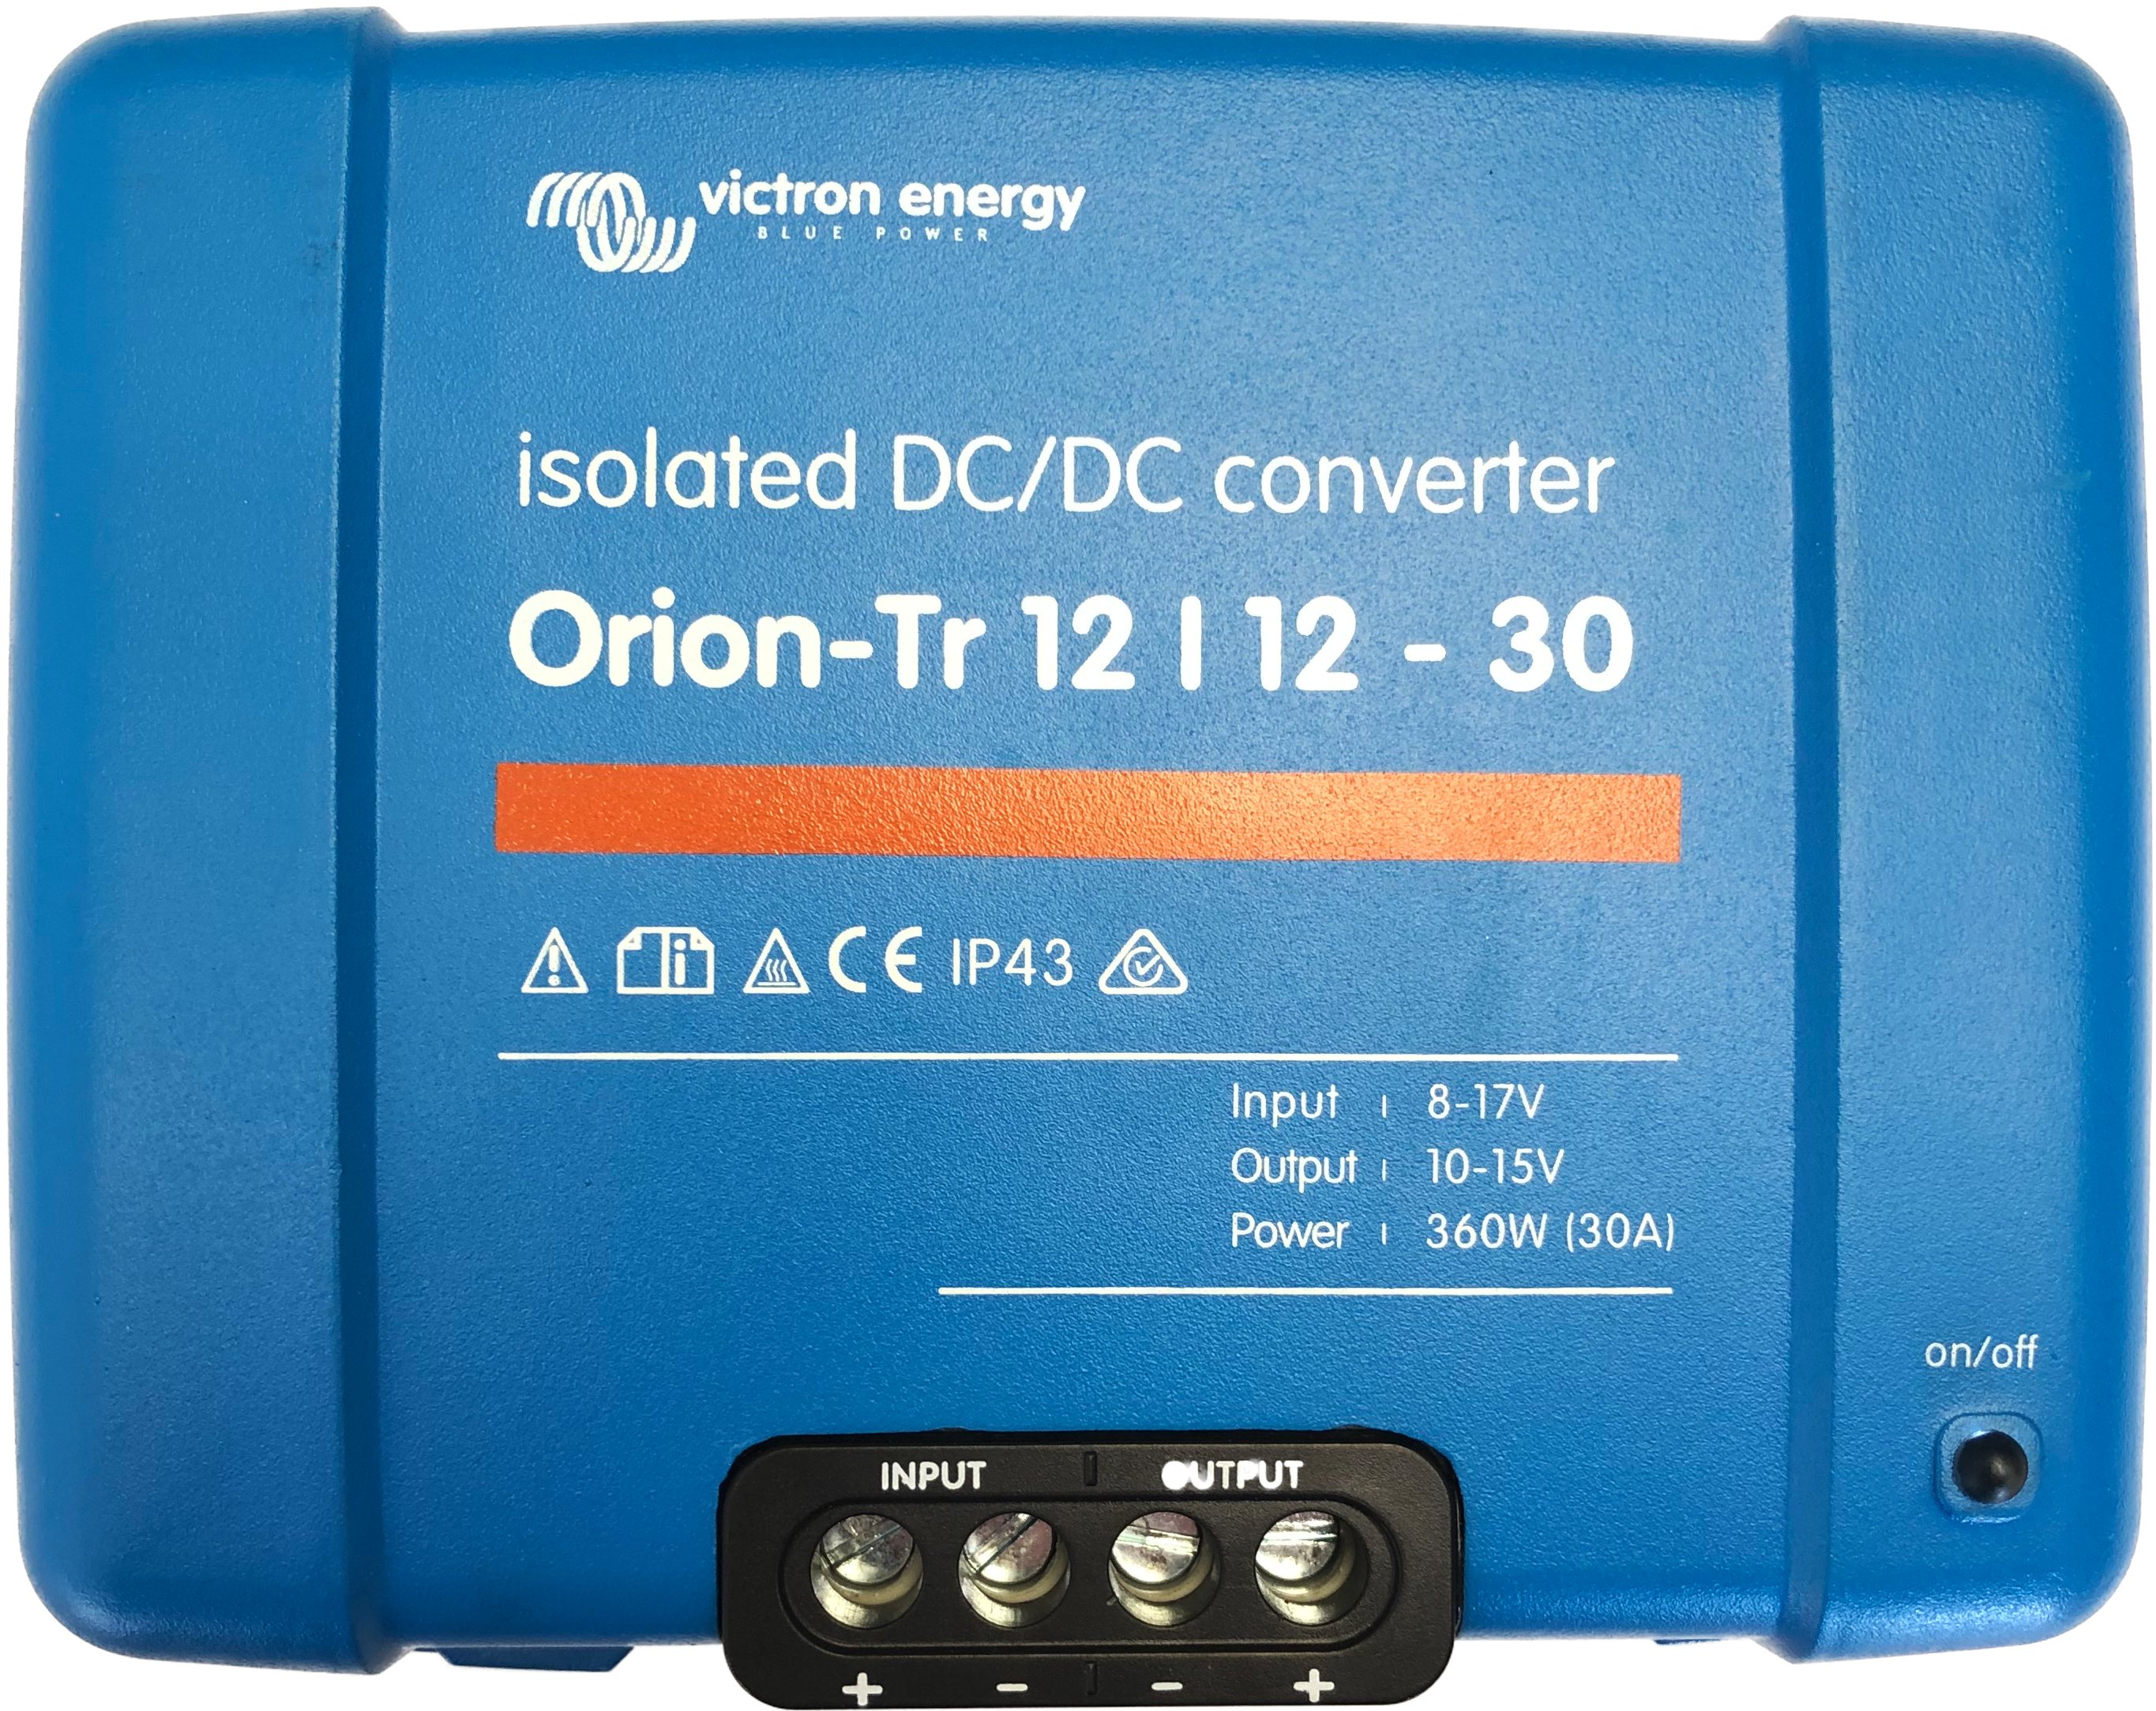 Does this non-isolated dc dc converter support three-stage charging and Bluetooth?